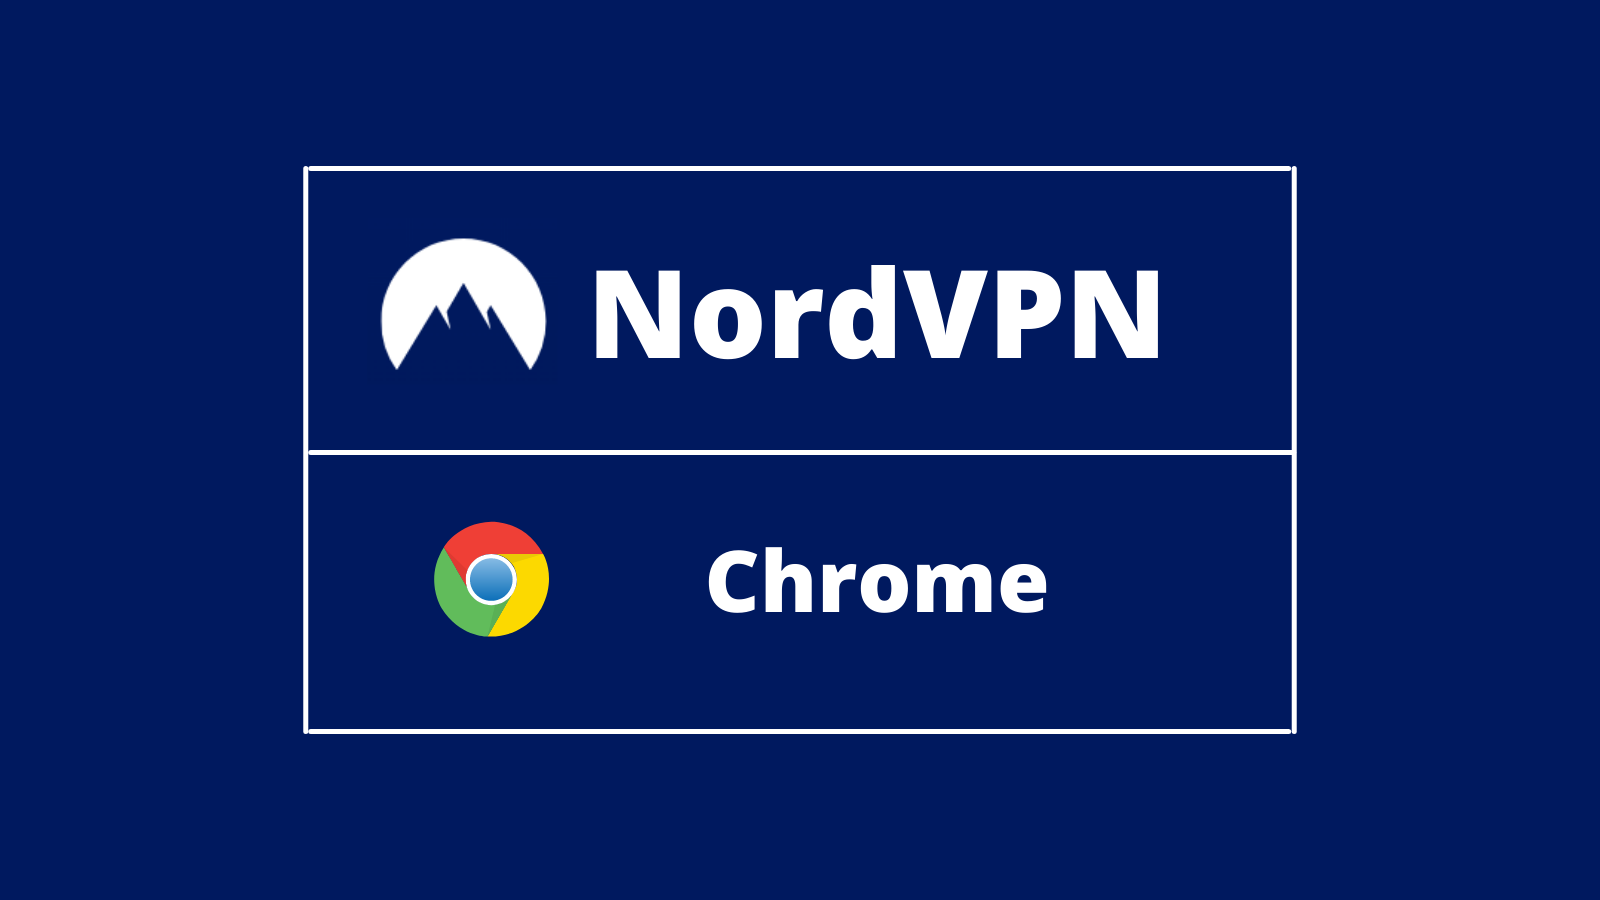 download chrome extension for nordvpn mac